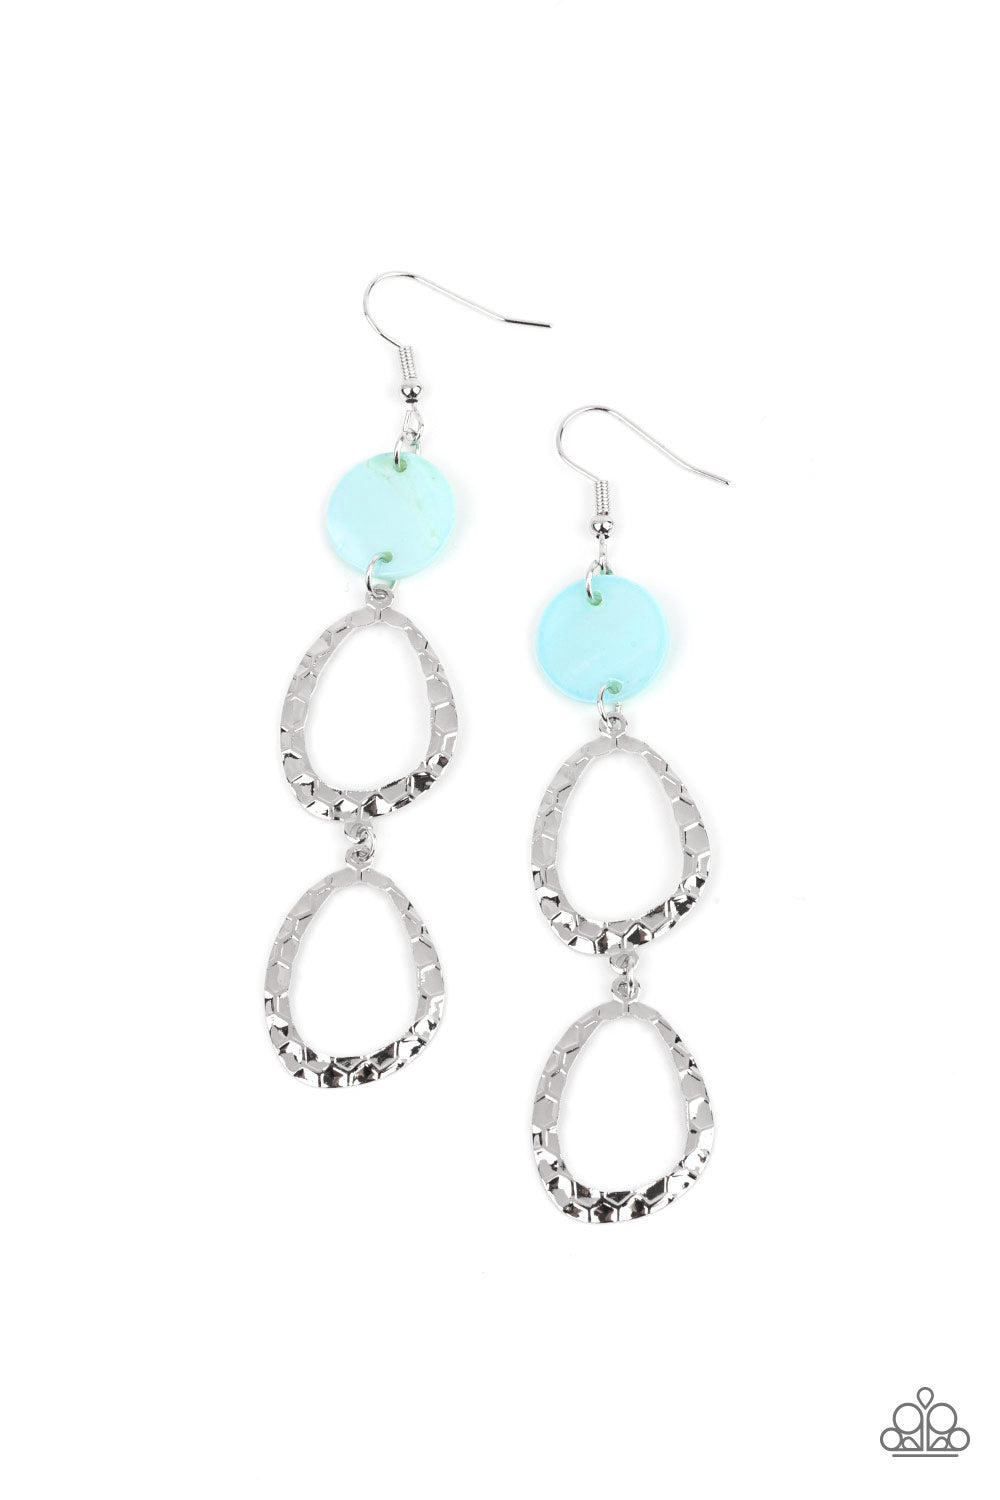 Paparazzi Accessories Surfside Shimmer - Blue Earrings - Lady T Accessories